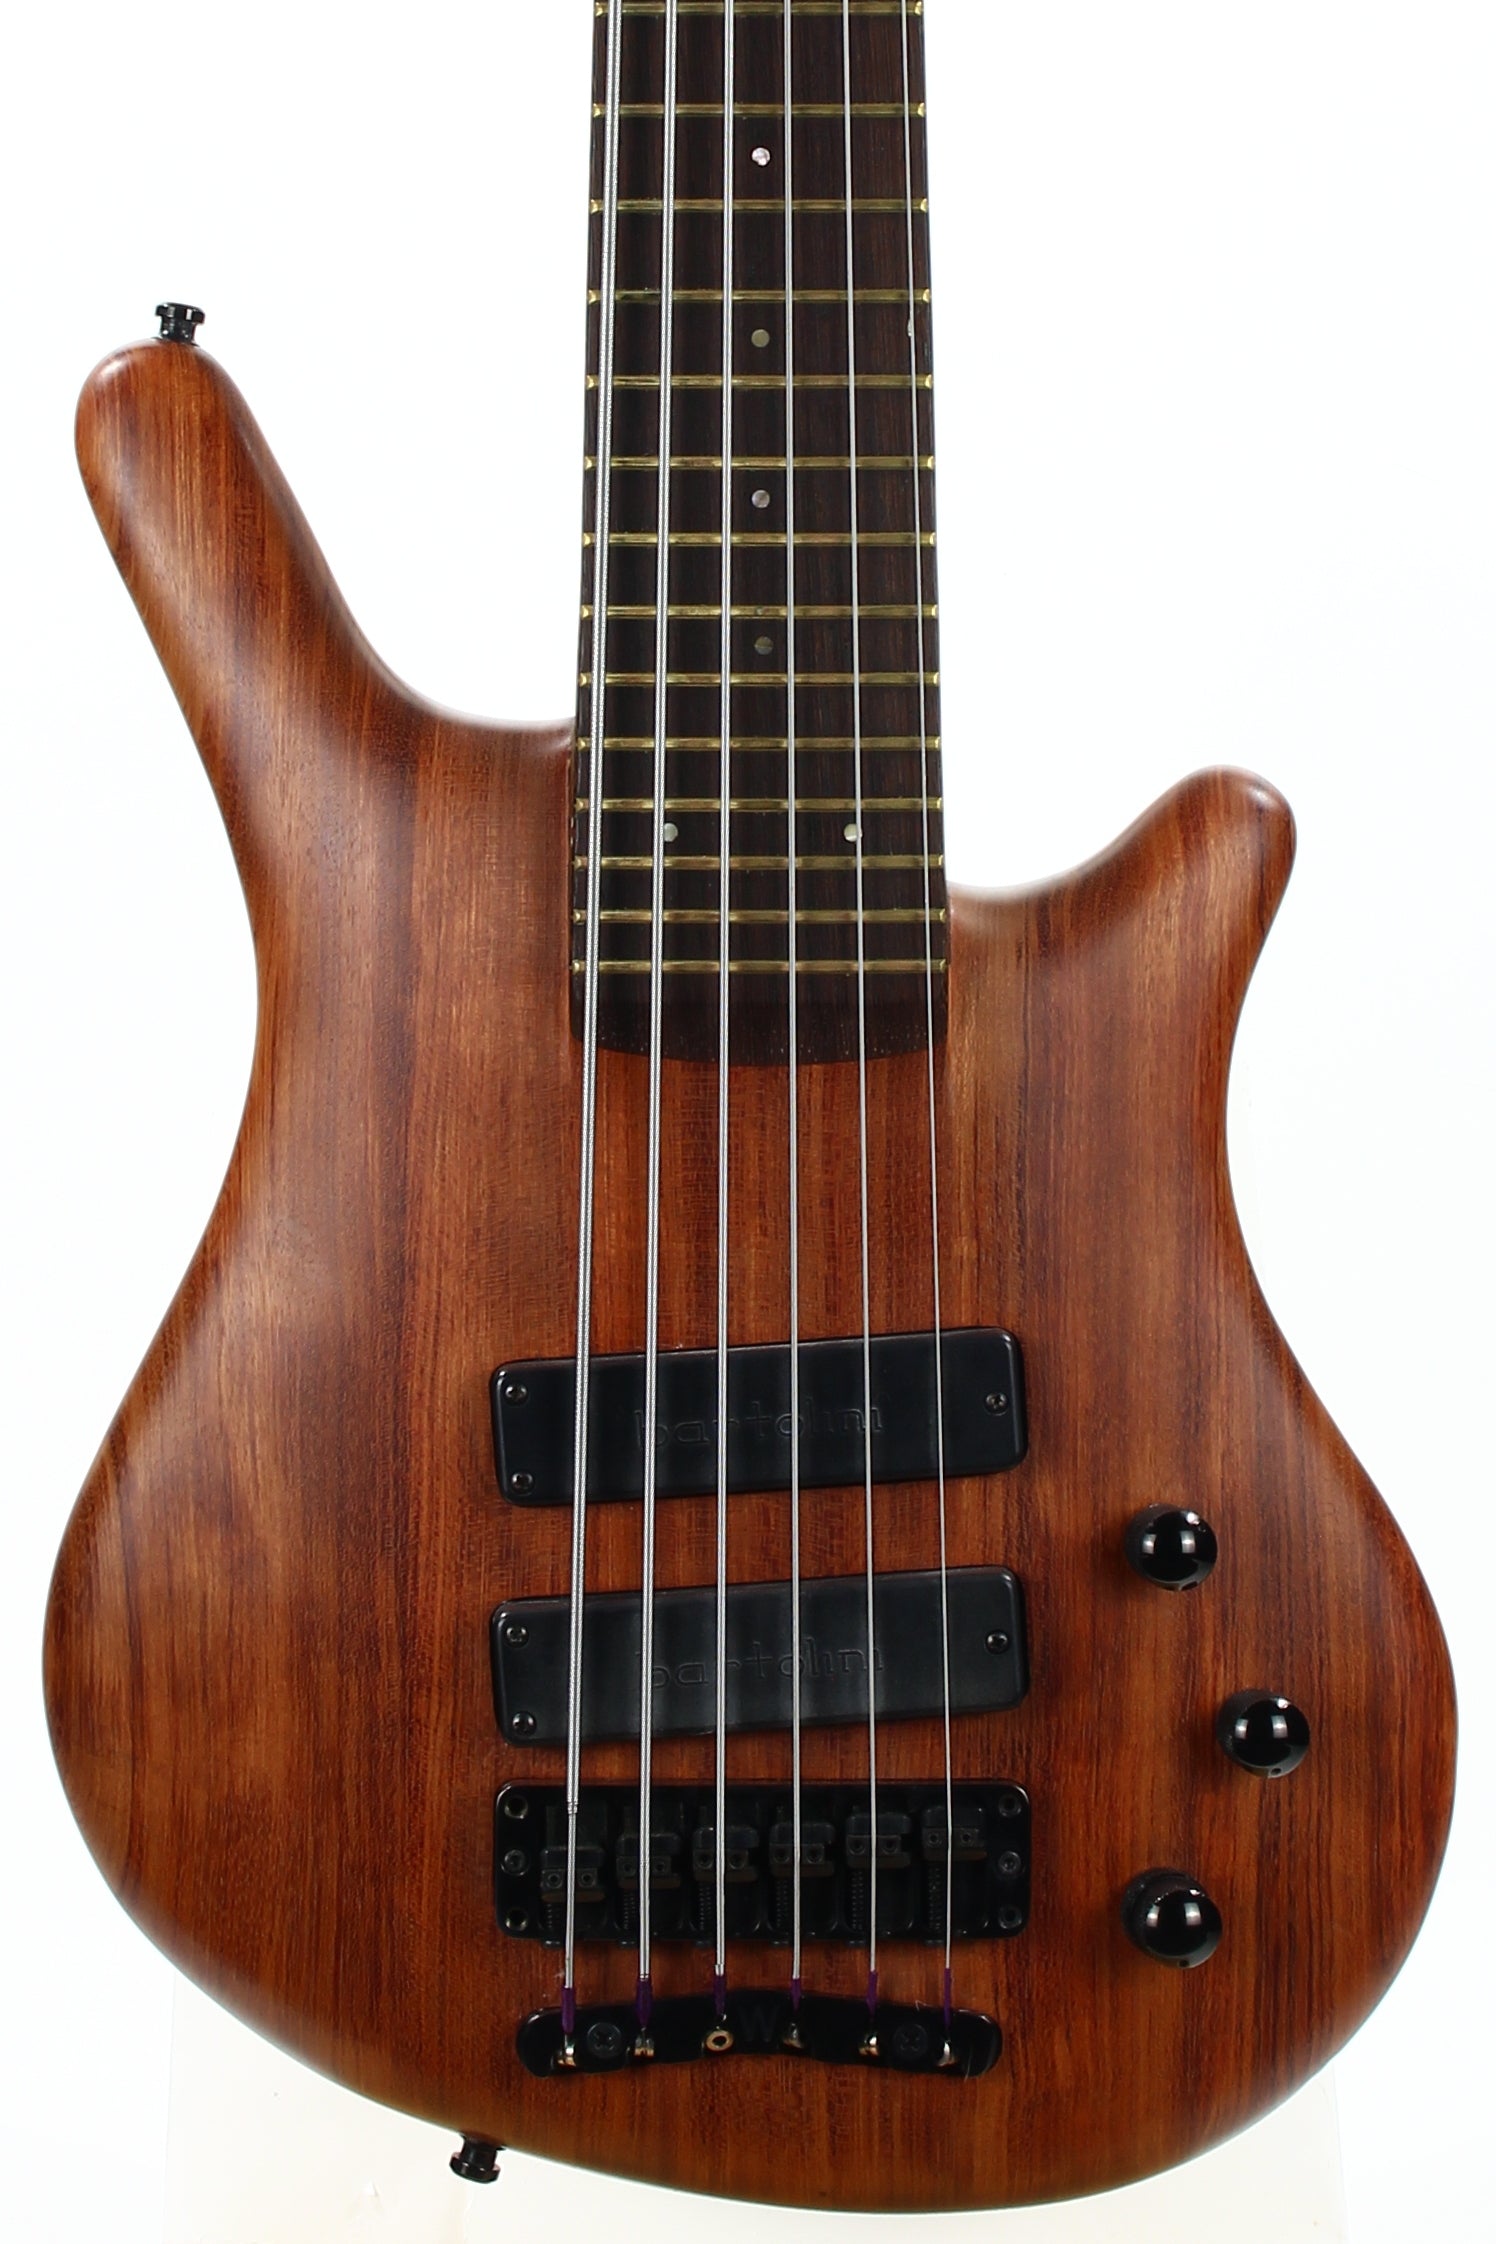 *SOLD*  MINTY 1990 Warwick Thumb NT 6 String Electric Bass - Neck Thru, One Owner, Made in Germany, Bubinga, Wenge, Natural Oil Finish!